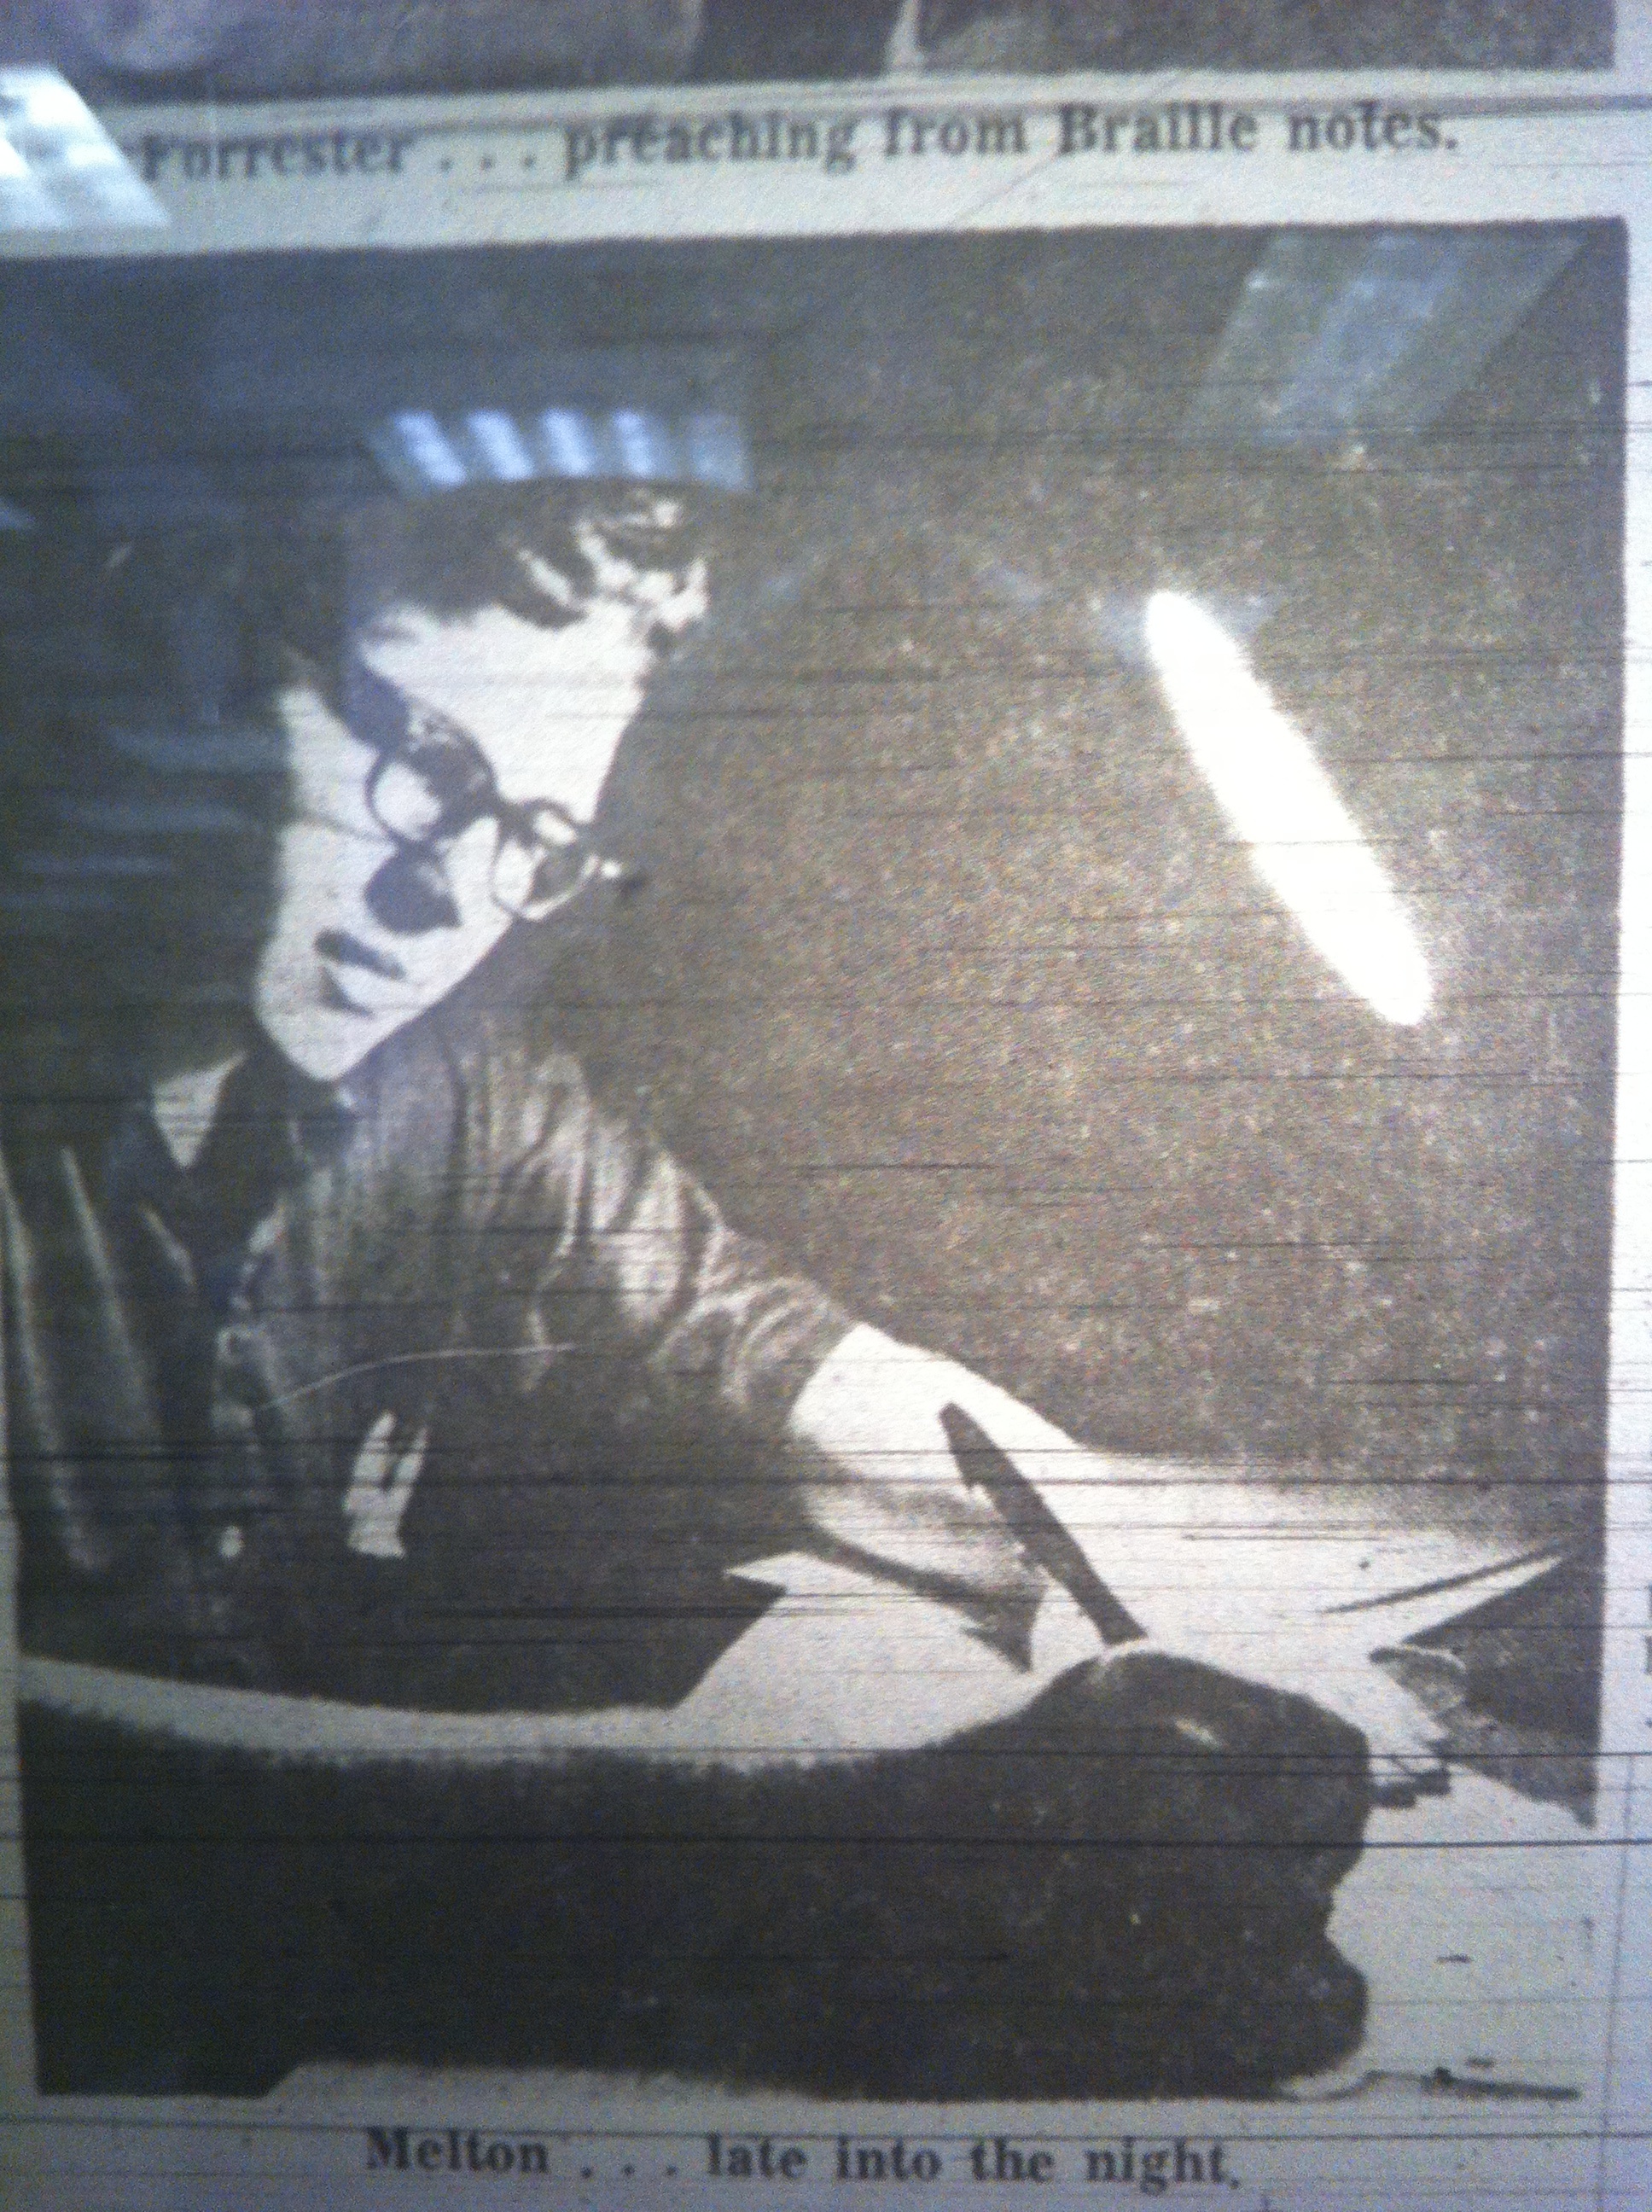 Taken for article in Amarillo newspaper about National Merit scholars. Shown as a writer even back then.